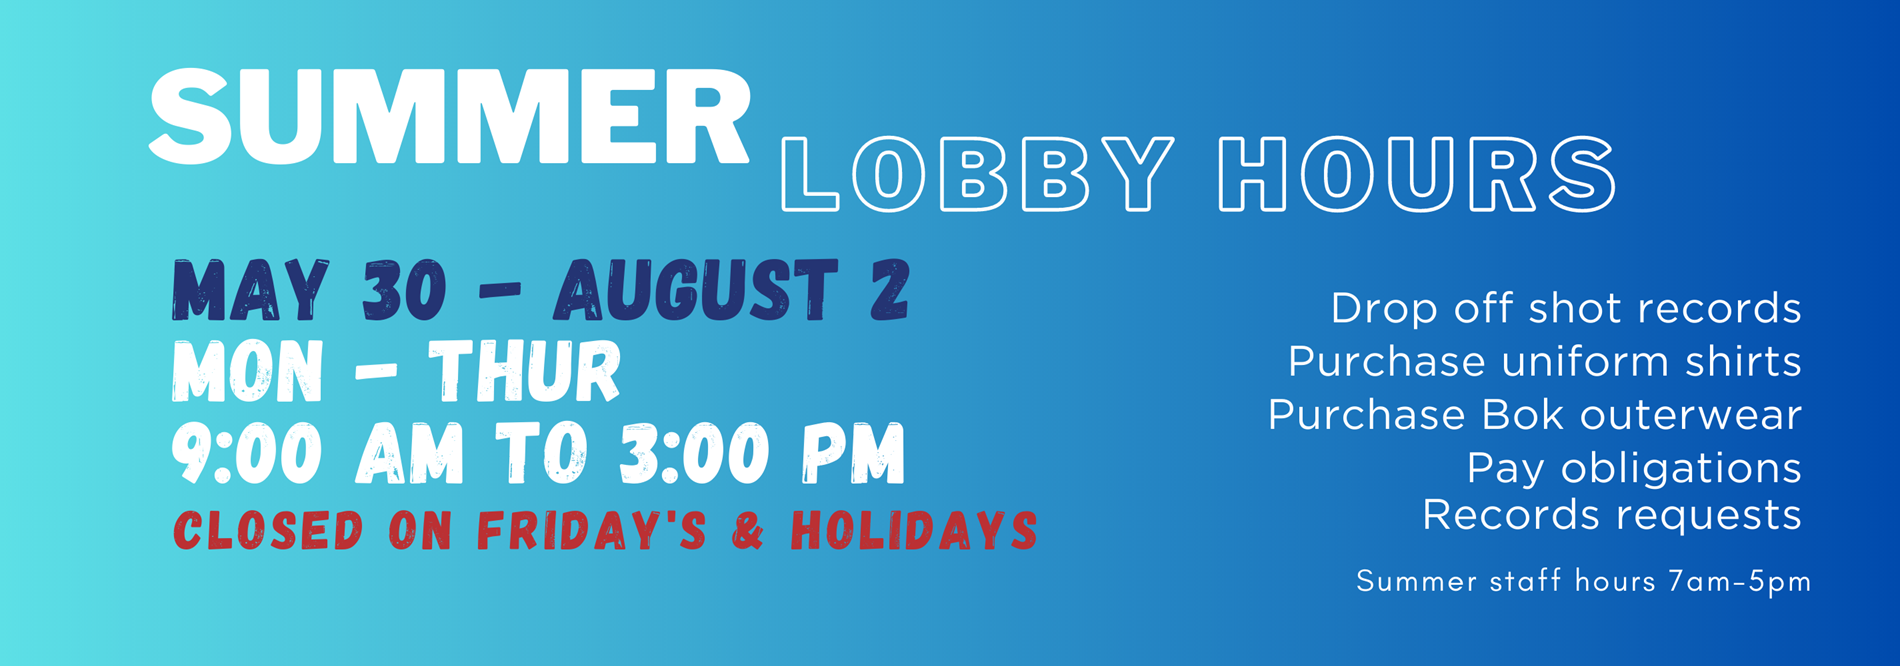 Lobby hours 9 am to 3 pm - Monday through Thursday. Closed on Fridays & holidays